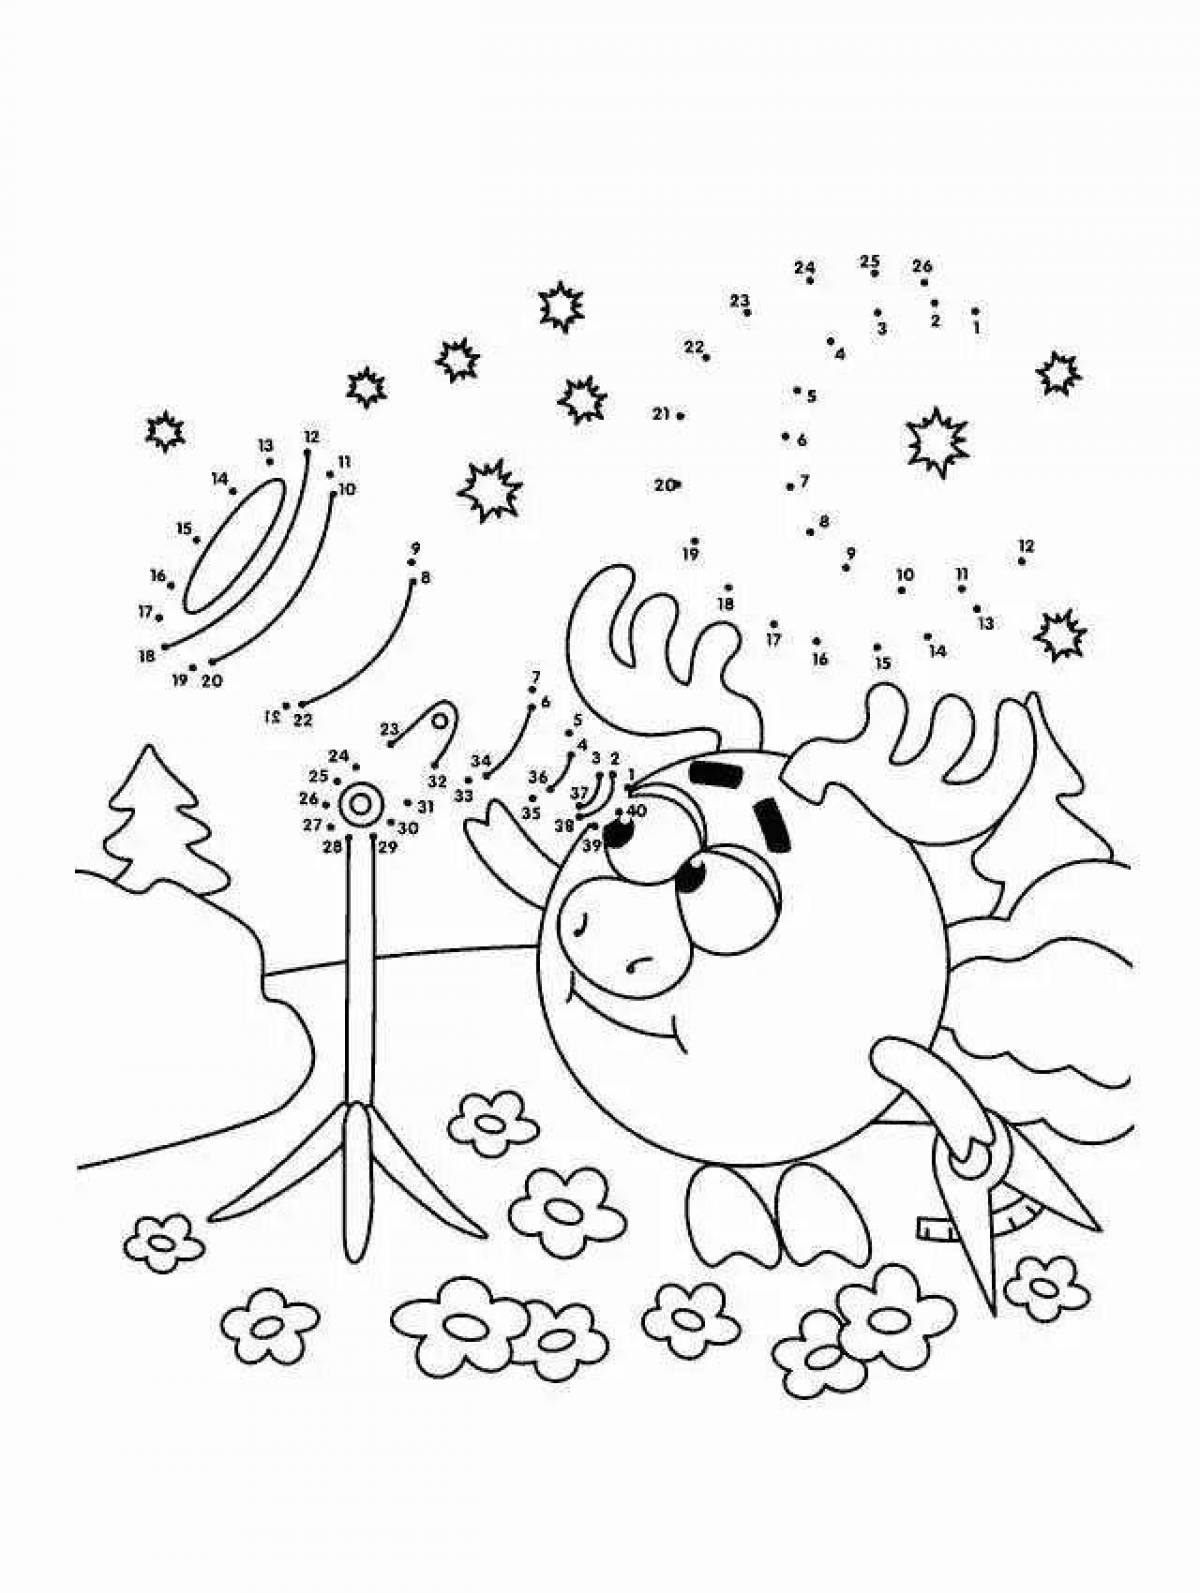 Funny Smeshariki coloring pages